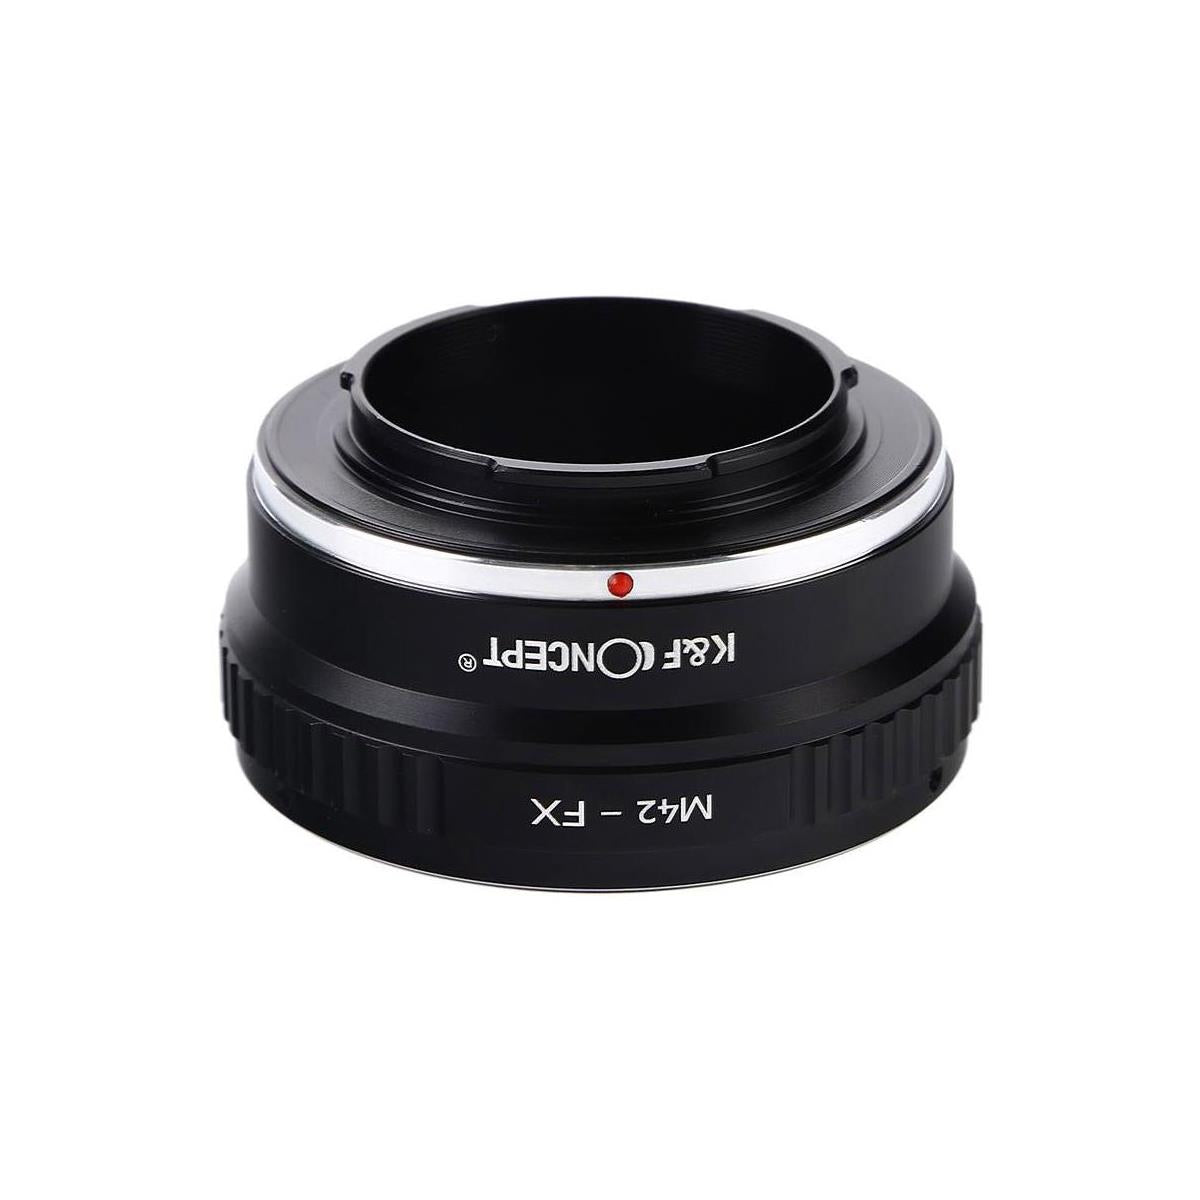 K&F Concept M42-FX High Precision Lens Adapter Mount for M42 Mount Lens to Fujifilm X-Mount Body Mirrorless Camera